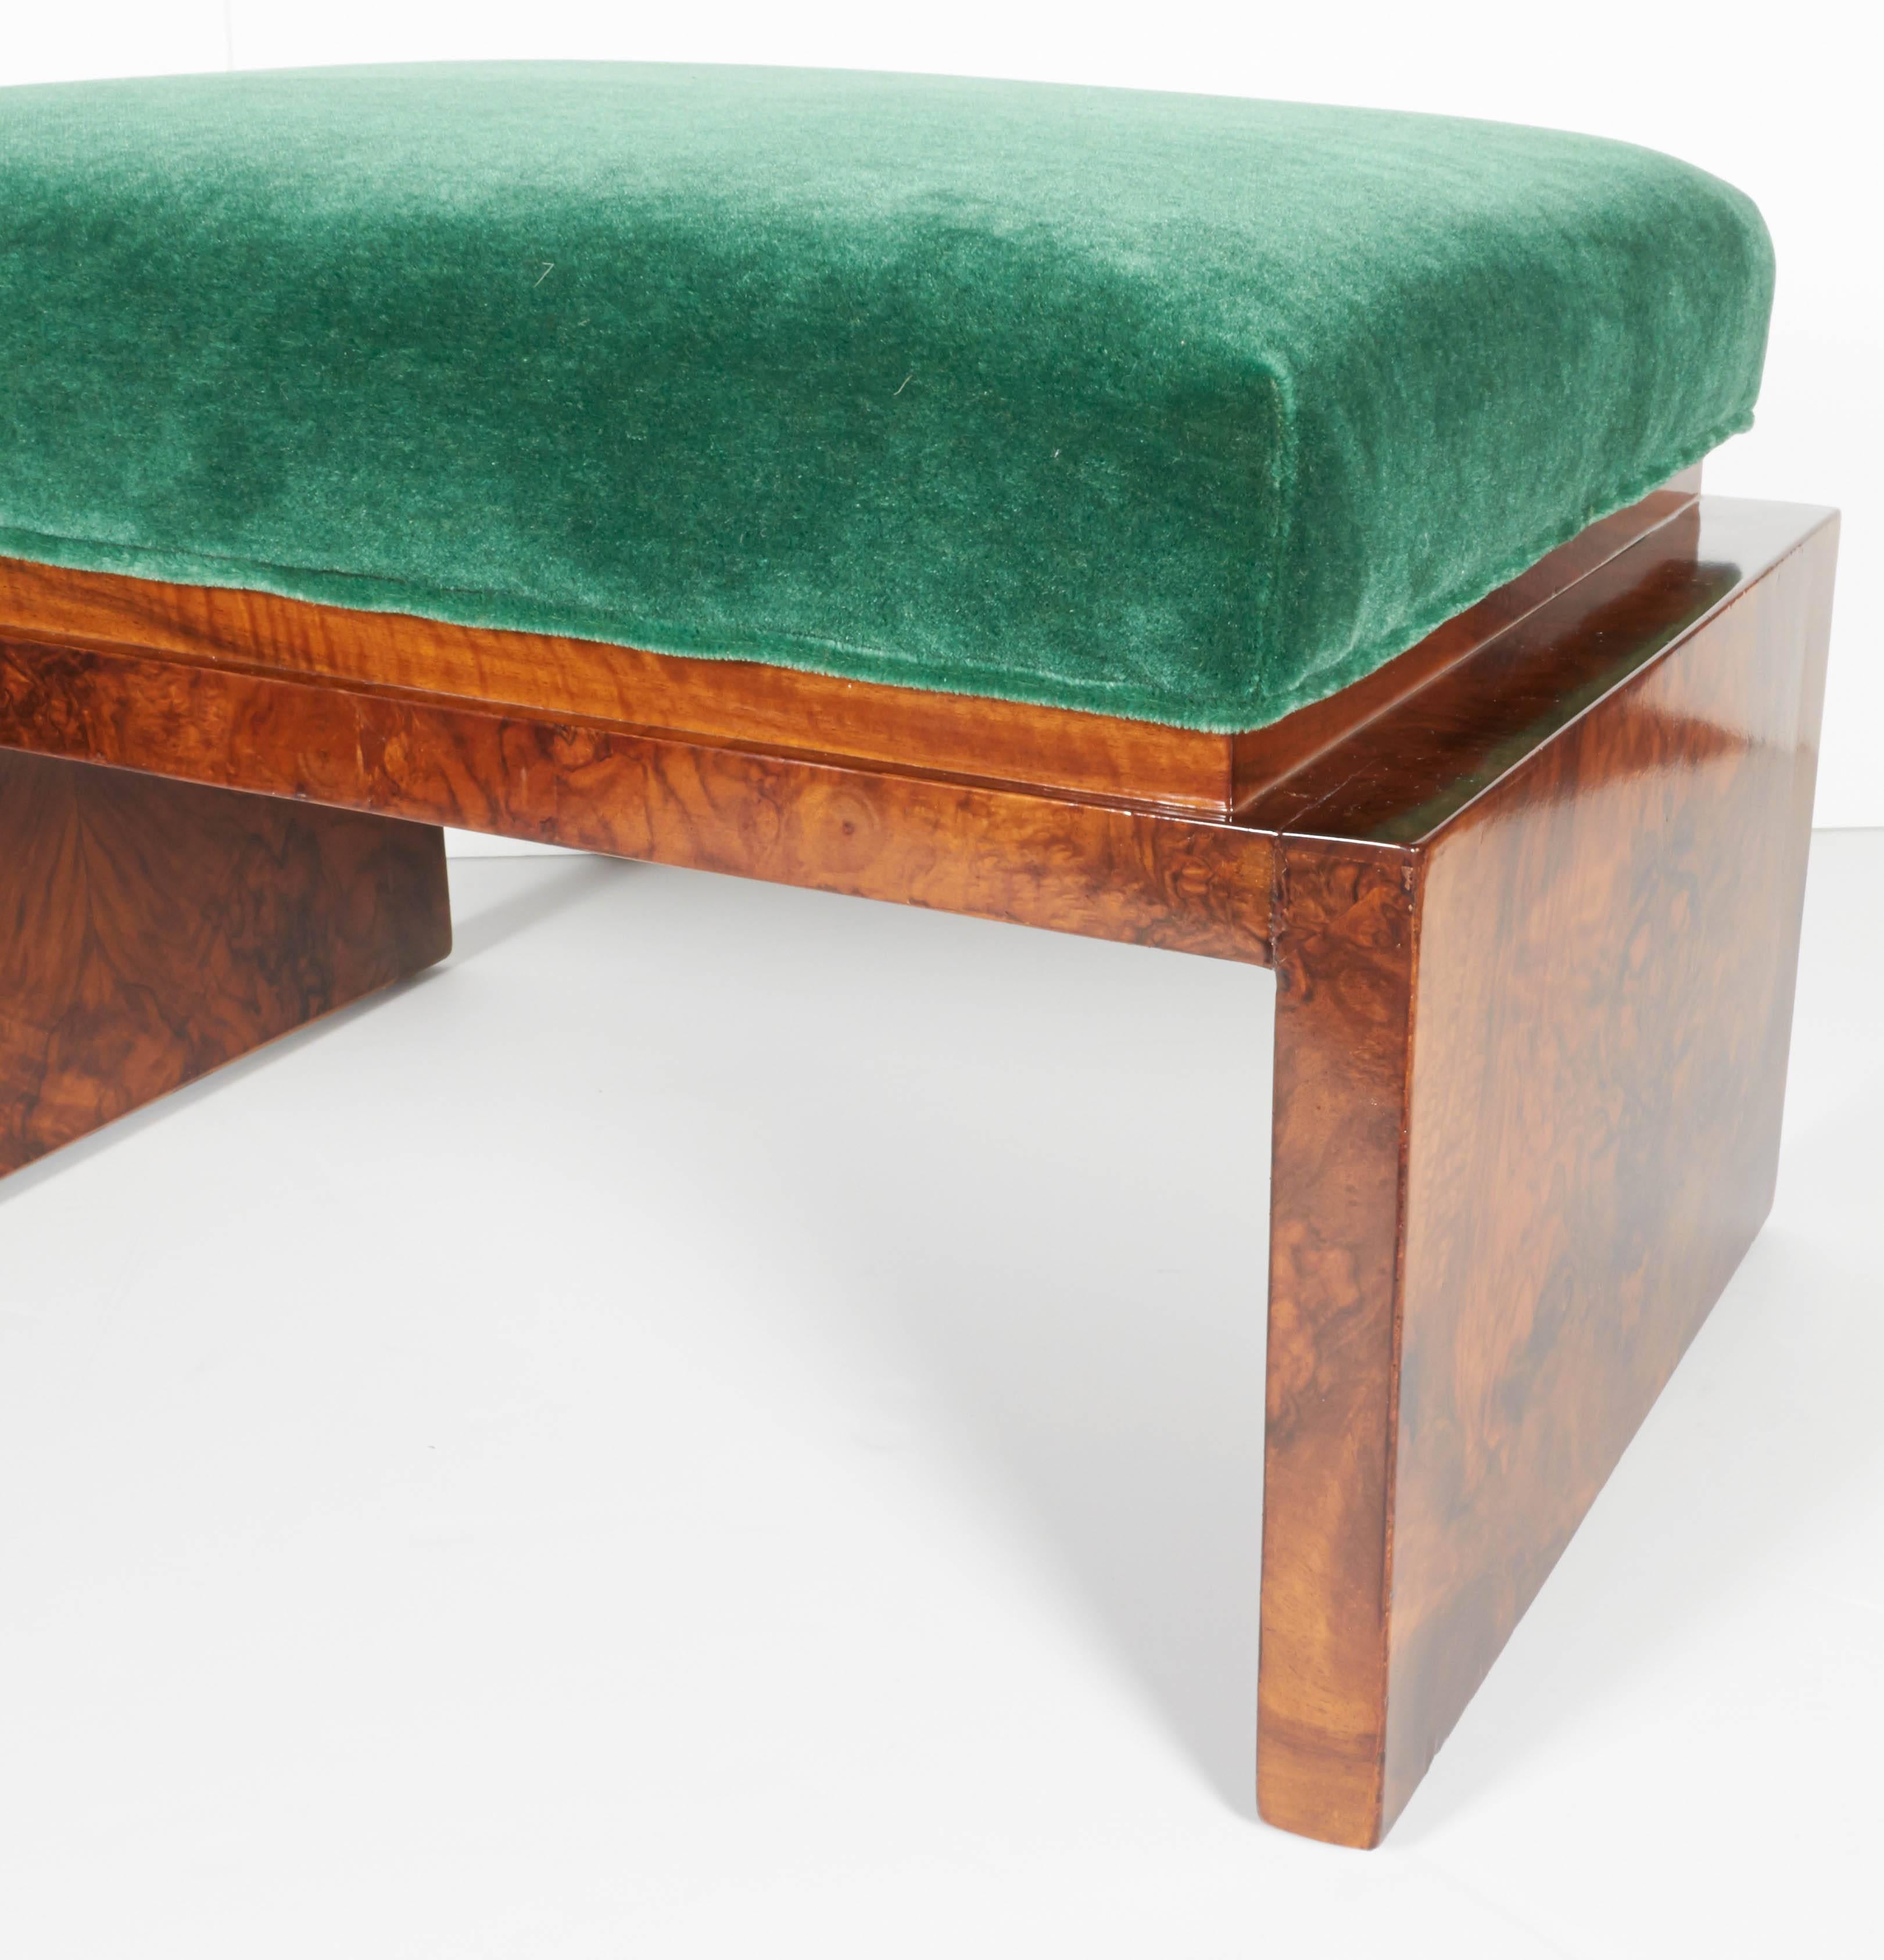 20th Century Rare Art Deco Low Benches in Emerald Mohair and Burled Carpathian Elm